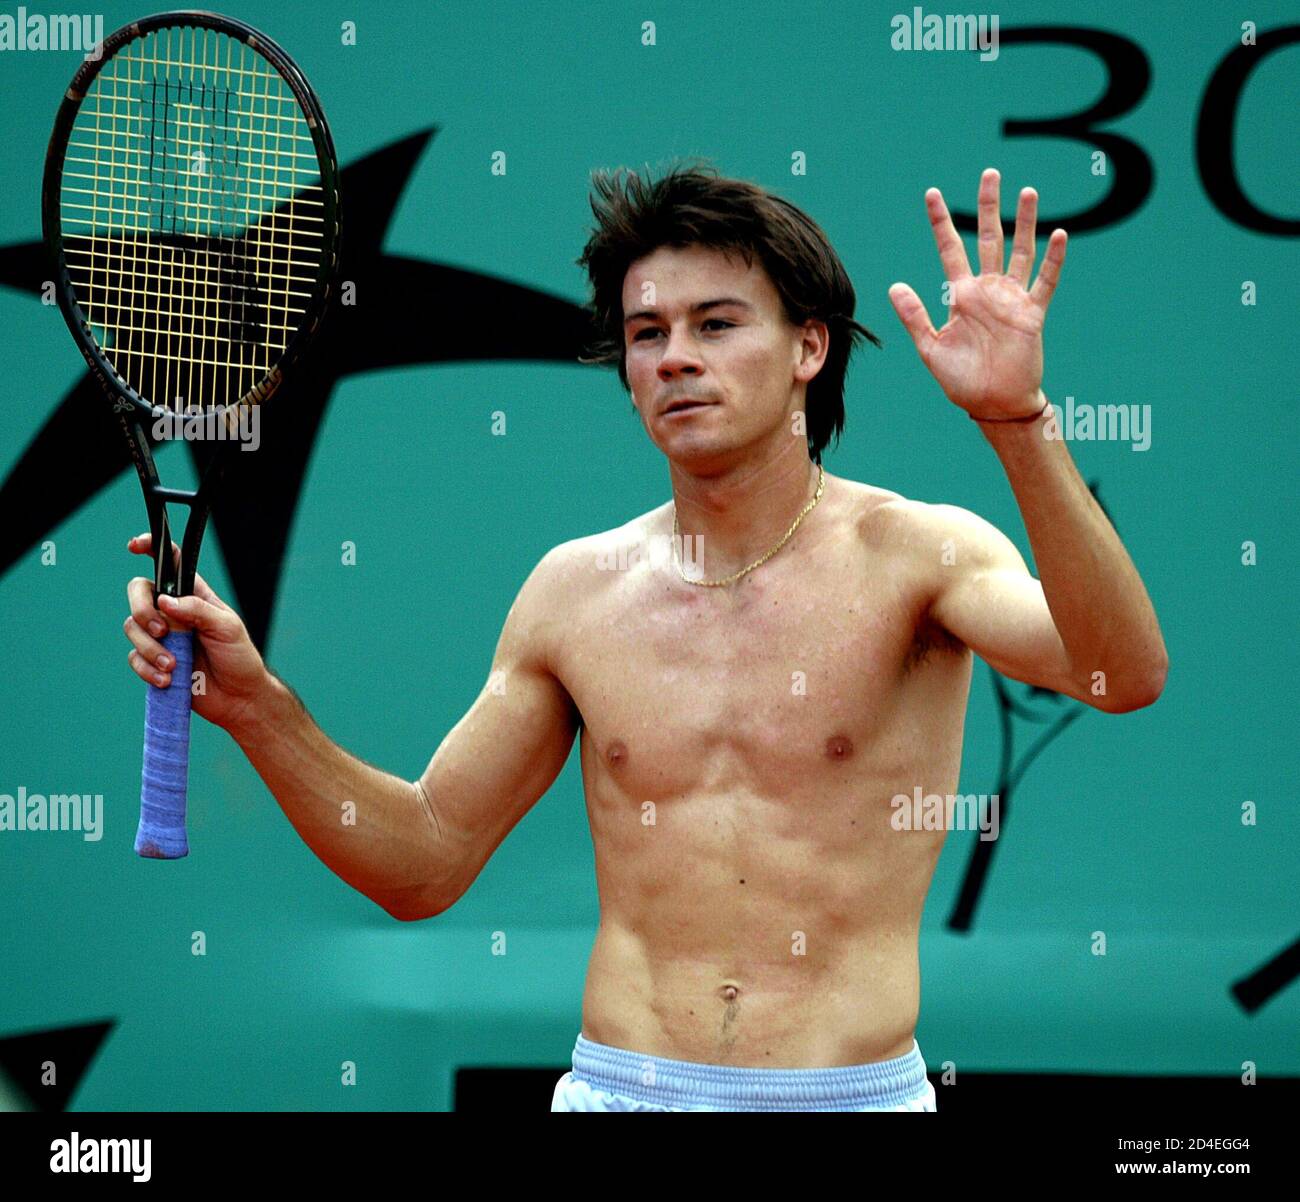 Guillermo Coria Of Argentina Walks With No Shirt On The Central Court After His Racket Hits A Ball Boy During His Match Against Martin Verkerk Of The Netherlands In The Semi Final Of